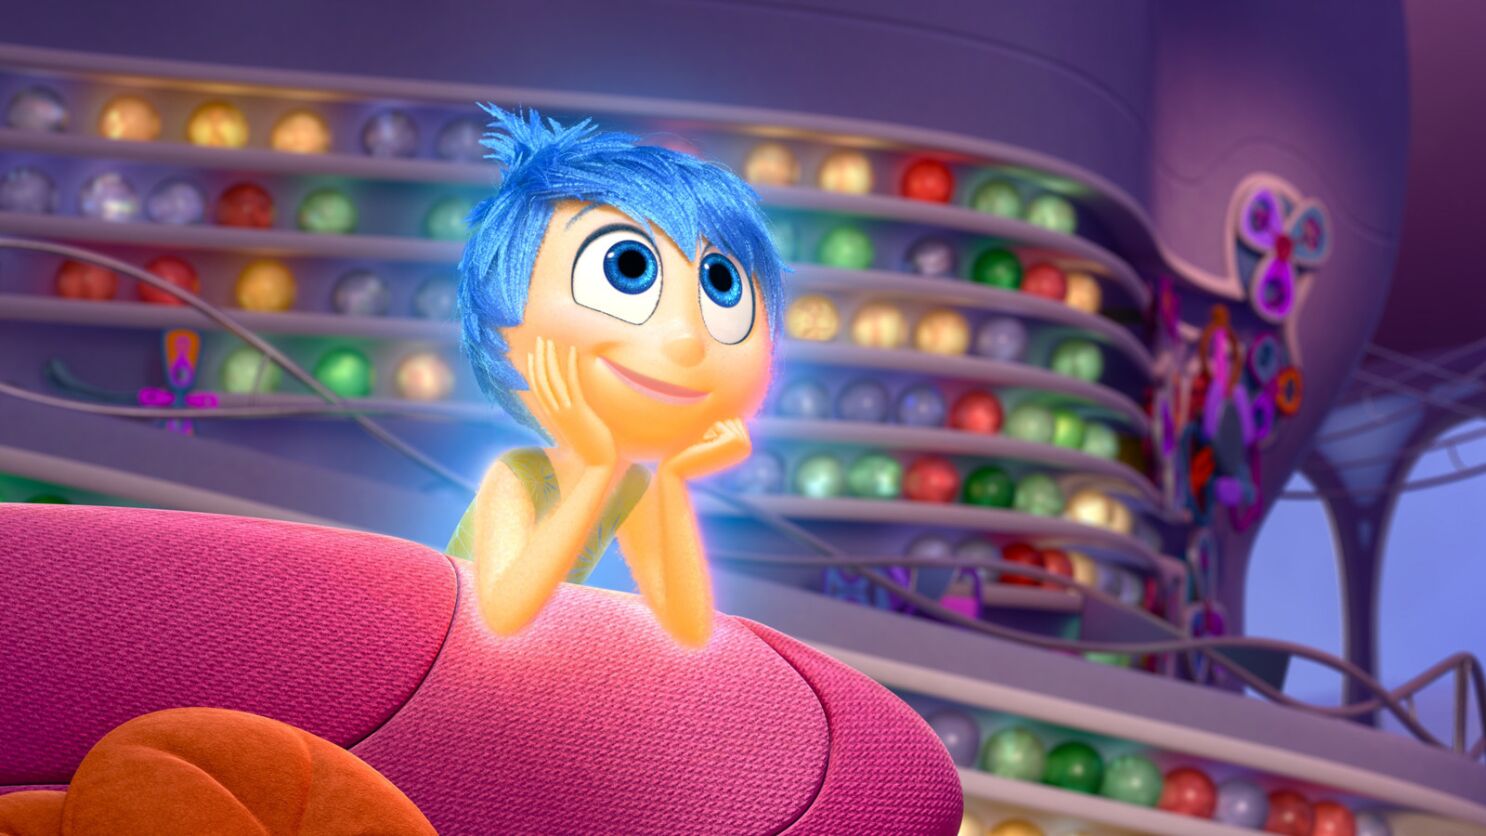 Inside Out': Is box office facing a wealth-gap problem? - Los Angeles Times